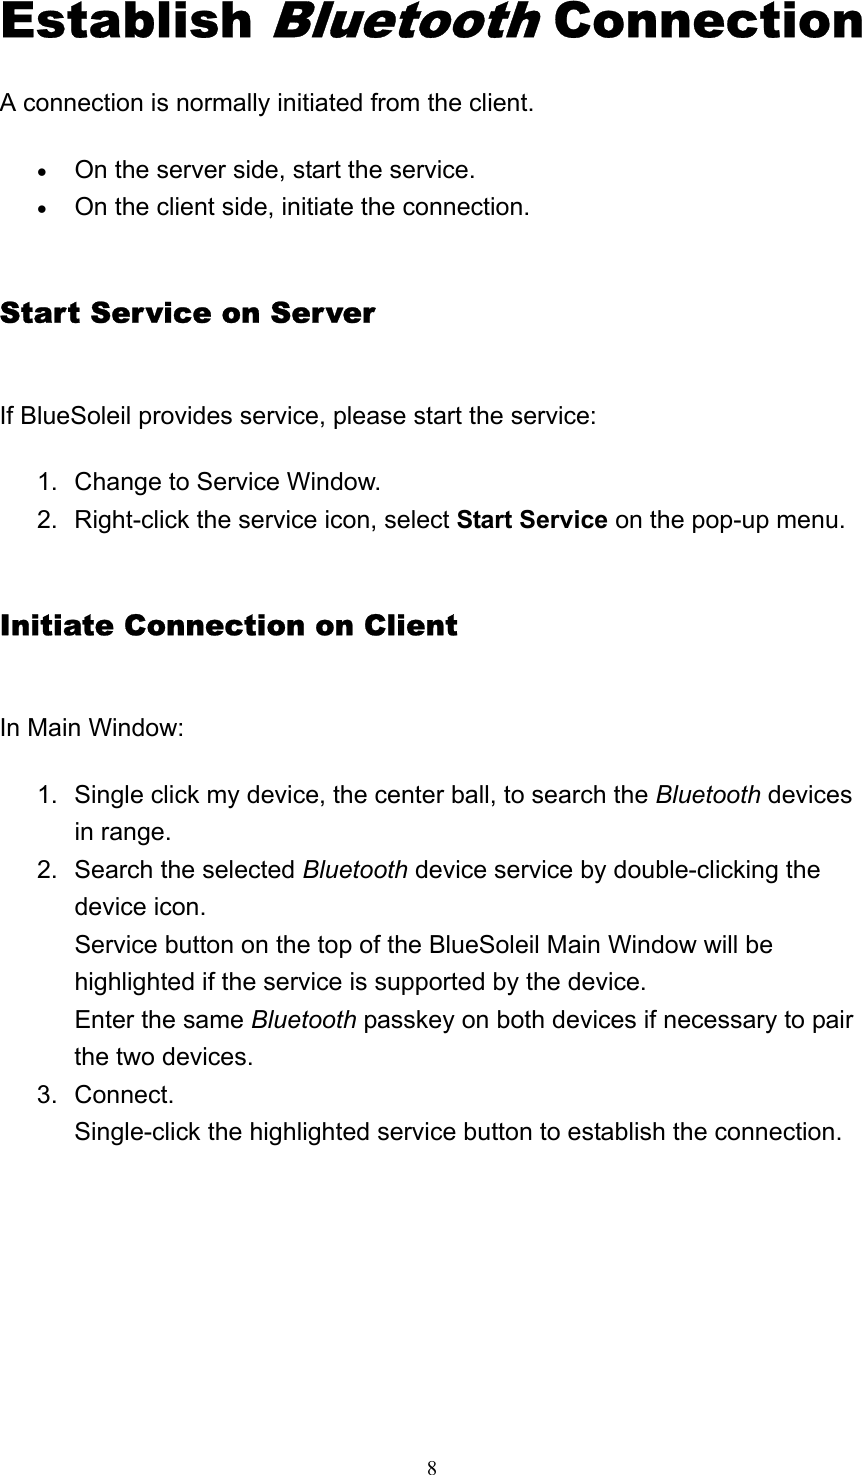   8Establish Bluetooth Connection A connection is normally initiated from the client. • On the server side, start the service.   • On the client side, initiate the connection.   Start Service on Server If BlueSoleil provides service, please start the service: 1.  Change to Service Window.   2.  Right-click the service icon, select Start Service on the pop-up menu.   Initiate Connection on Client In Main Window: 1.  Single click my device, the center ball, to search the Bluetooth devices in range.   2.  Search the selected Bluetooth device service by double-clicking the device icon. Service button on the top of the BlueSoleil Main Window will be highlighted if the service is supported by the device. Enter the same Bluetooth passkey on both devices if necessary to pair the two devices.   3. Connect. Single-click the highlighted service button to establish the connection.       